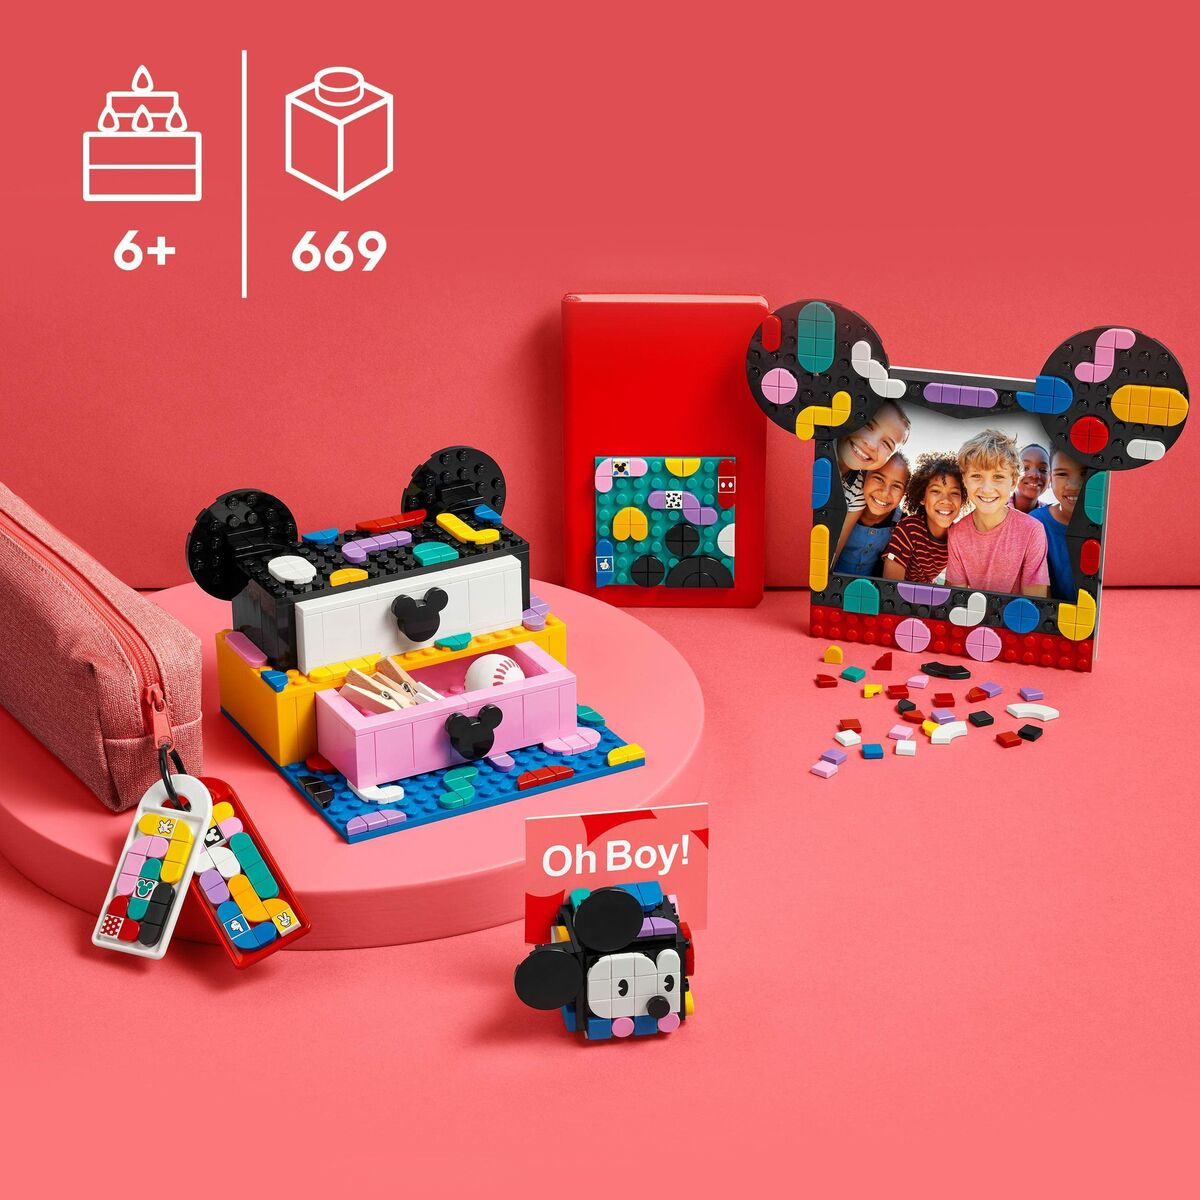 Bouwspel Lego DOTS 41964 Mickey Mouse and Minnie Mouse